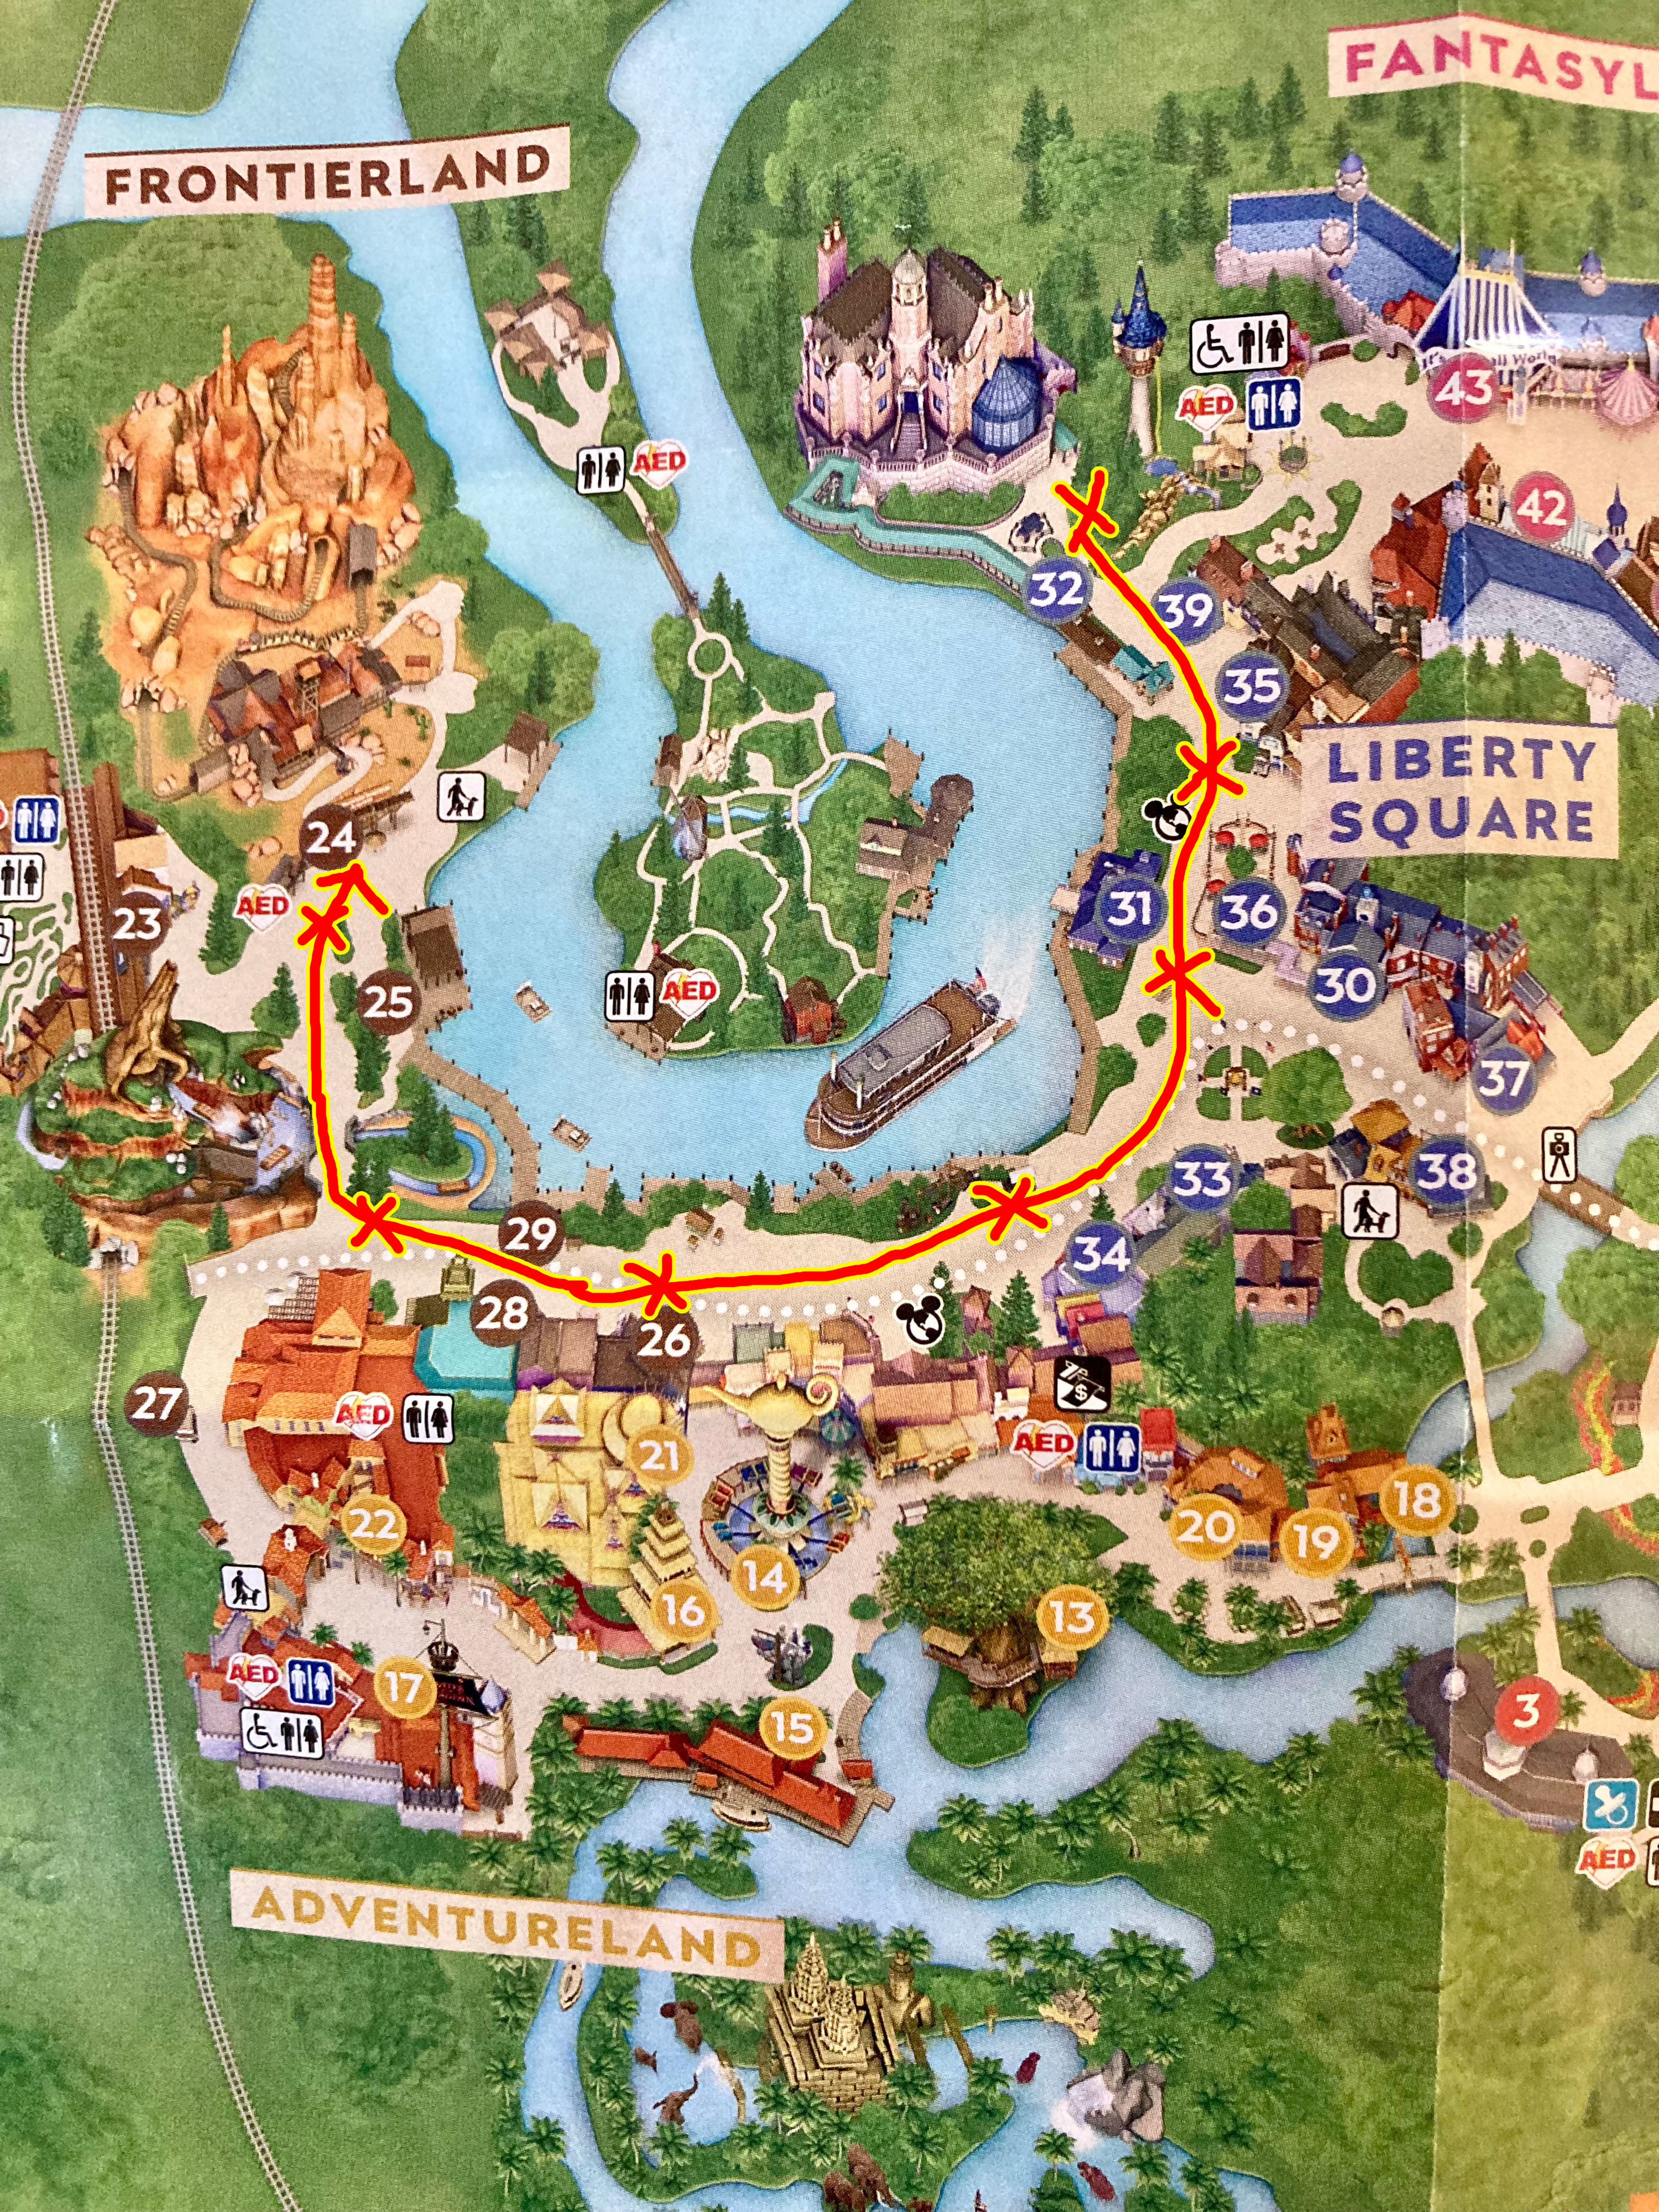 A map of the Magic Kingdom with an arrow traveling around the boardwalk between Liberty Square and Frontierland